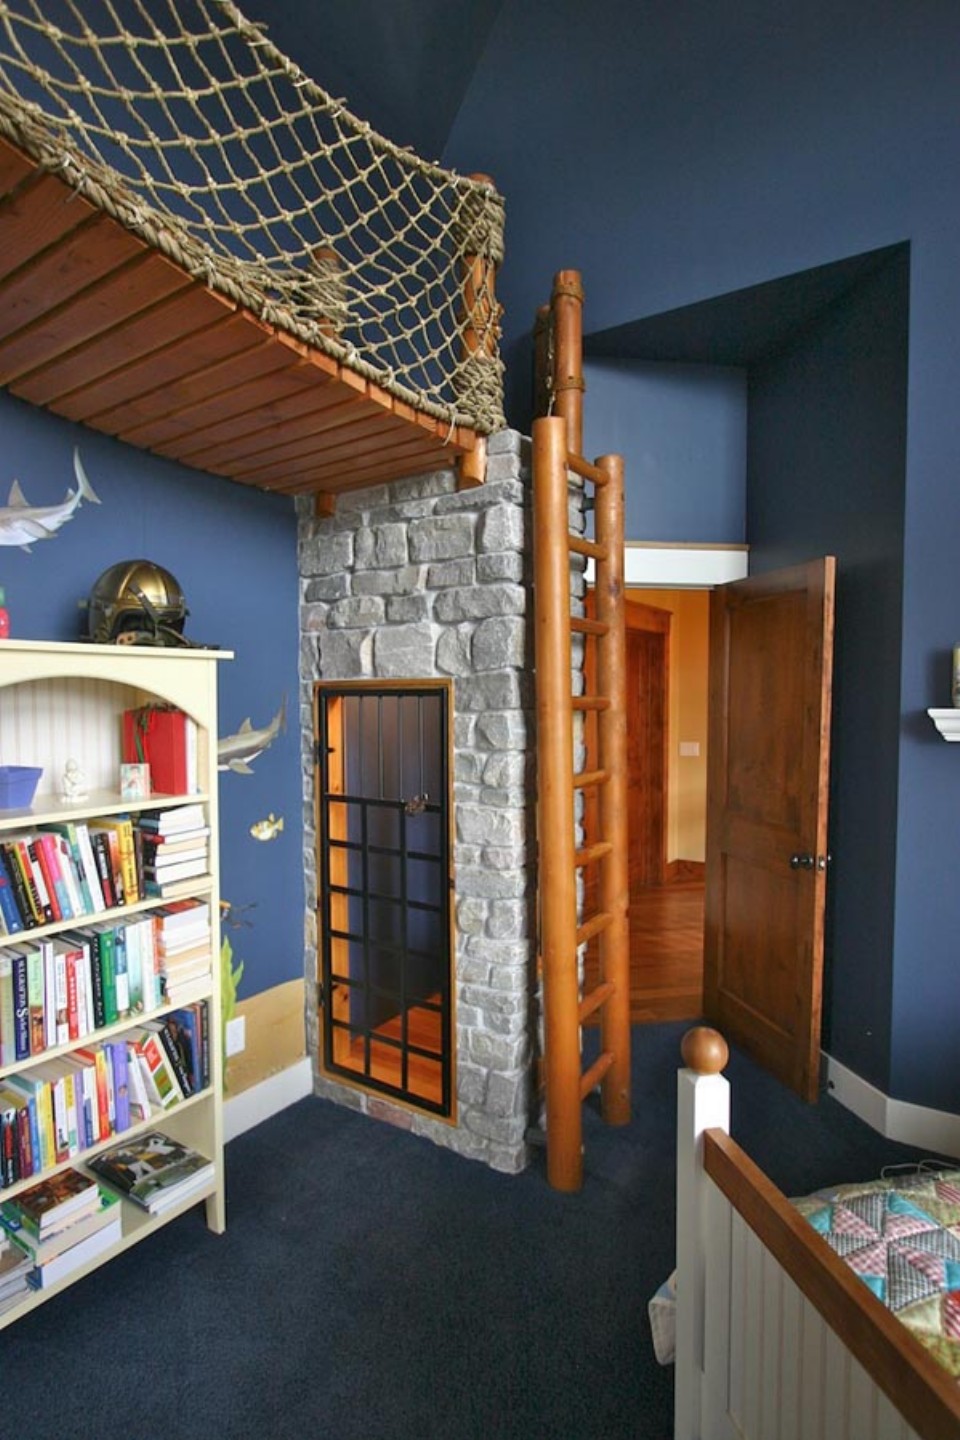 Kids Room Small Extraordinary Kids Room Furniture For Small Spaces Design Ideas With Astounding Dark Blue Wall Paint Color And Cool Wood Loft Bridge Design Also Natural White Stone Accent And White Bookcase Idea Furniture Composing The Special Type Of Kids Room Furniture